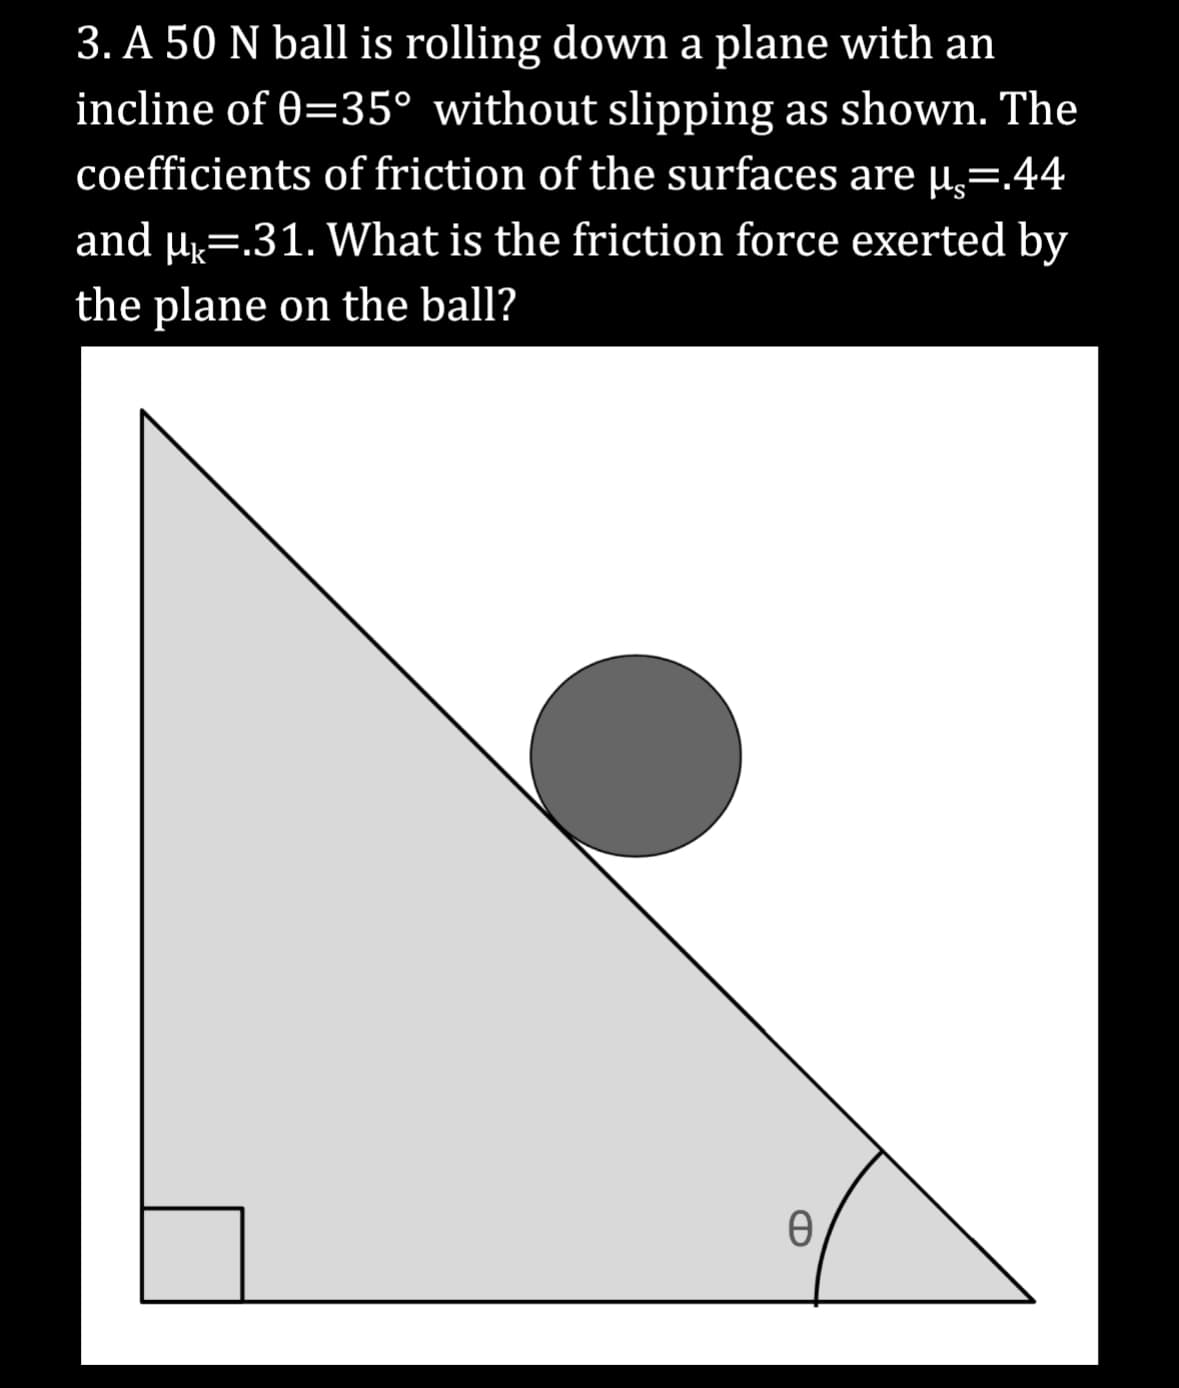 3. A 50 N ball is rolling down a plane with an
incline of 0=35° without slipping as shown. The
coefficients of friction of the surfaces are µ.=.44
and µ =.31. What is the friction force exerted by
the plane on the ball?
0